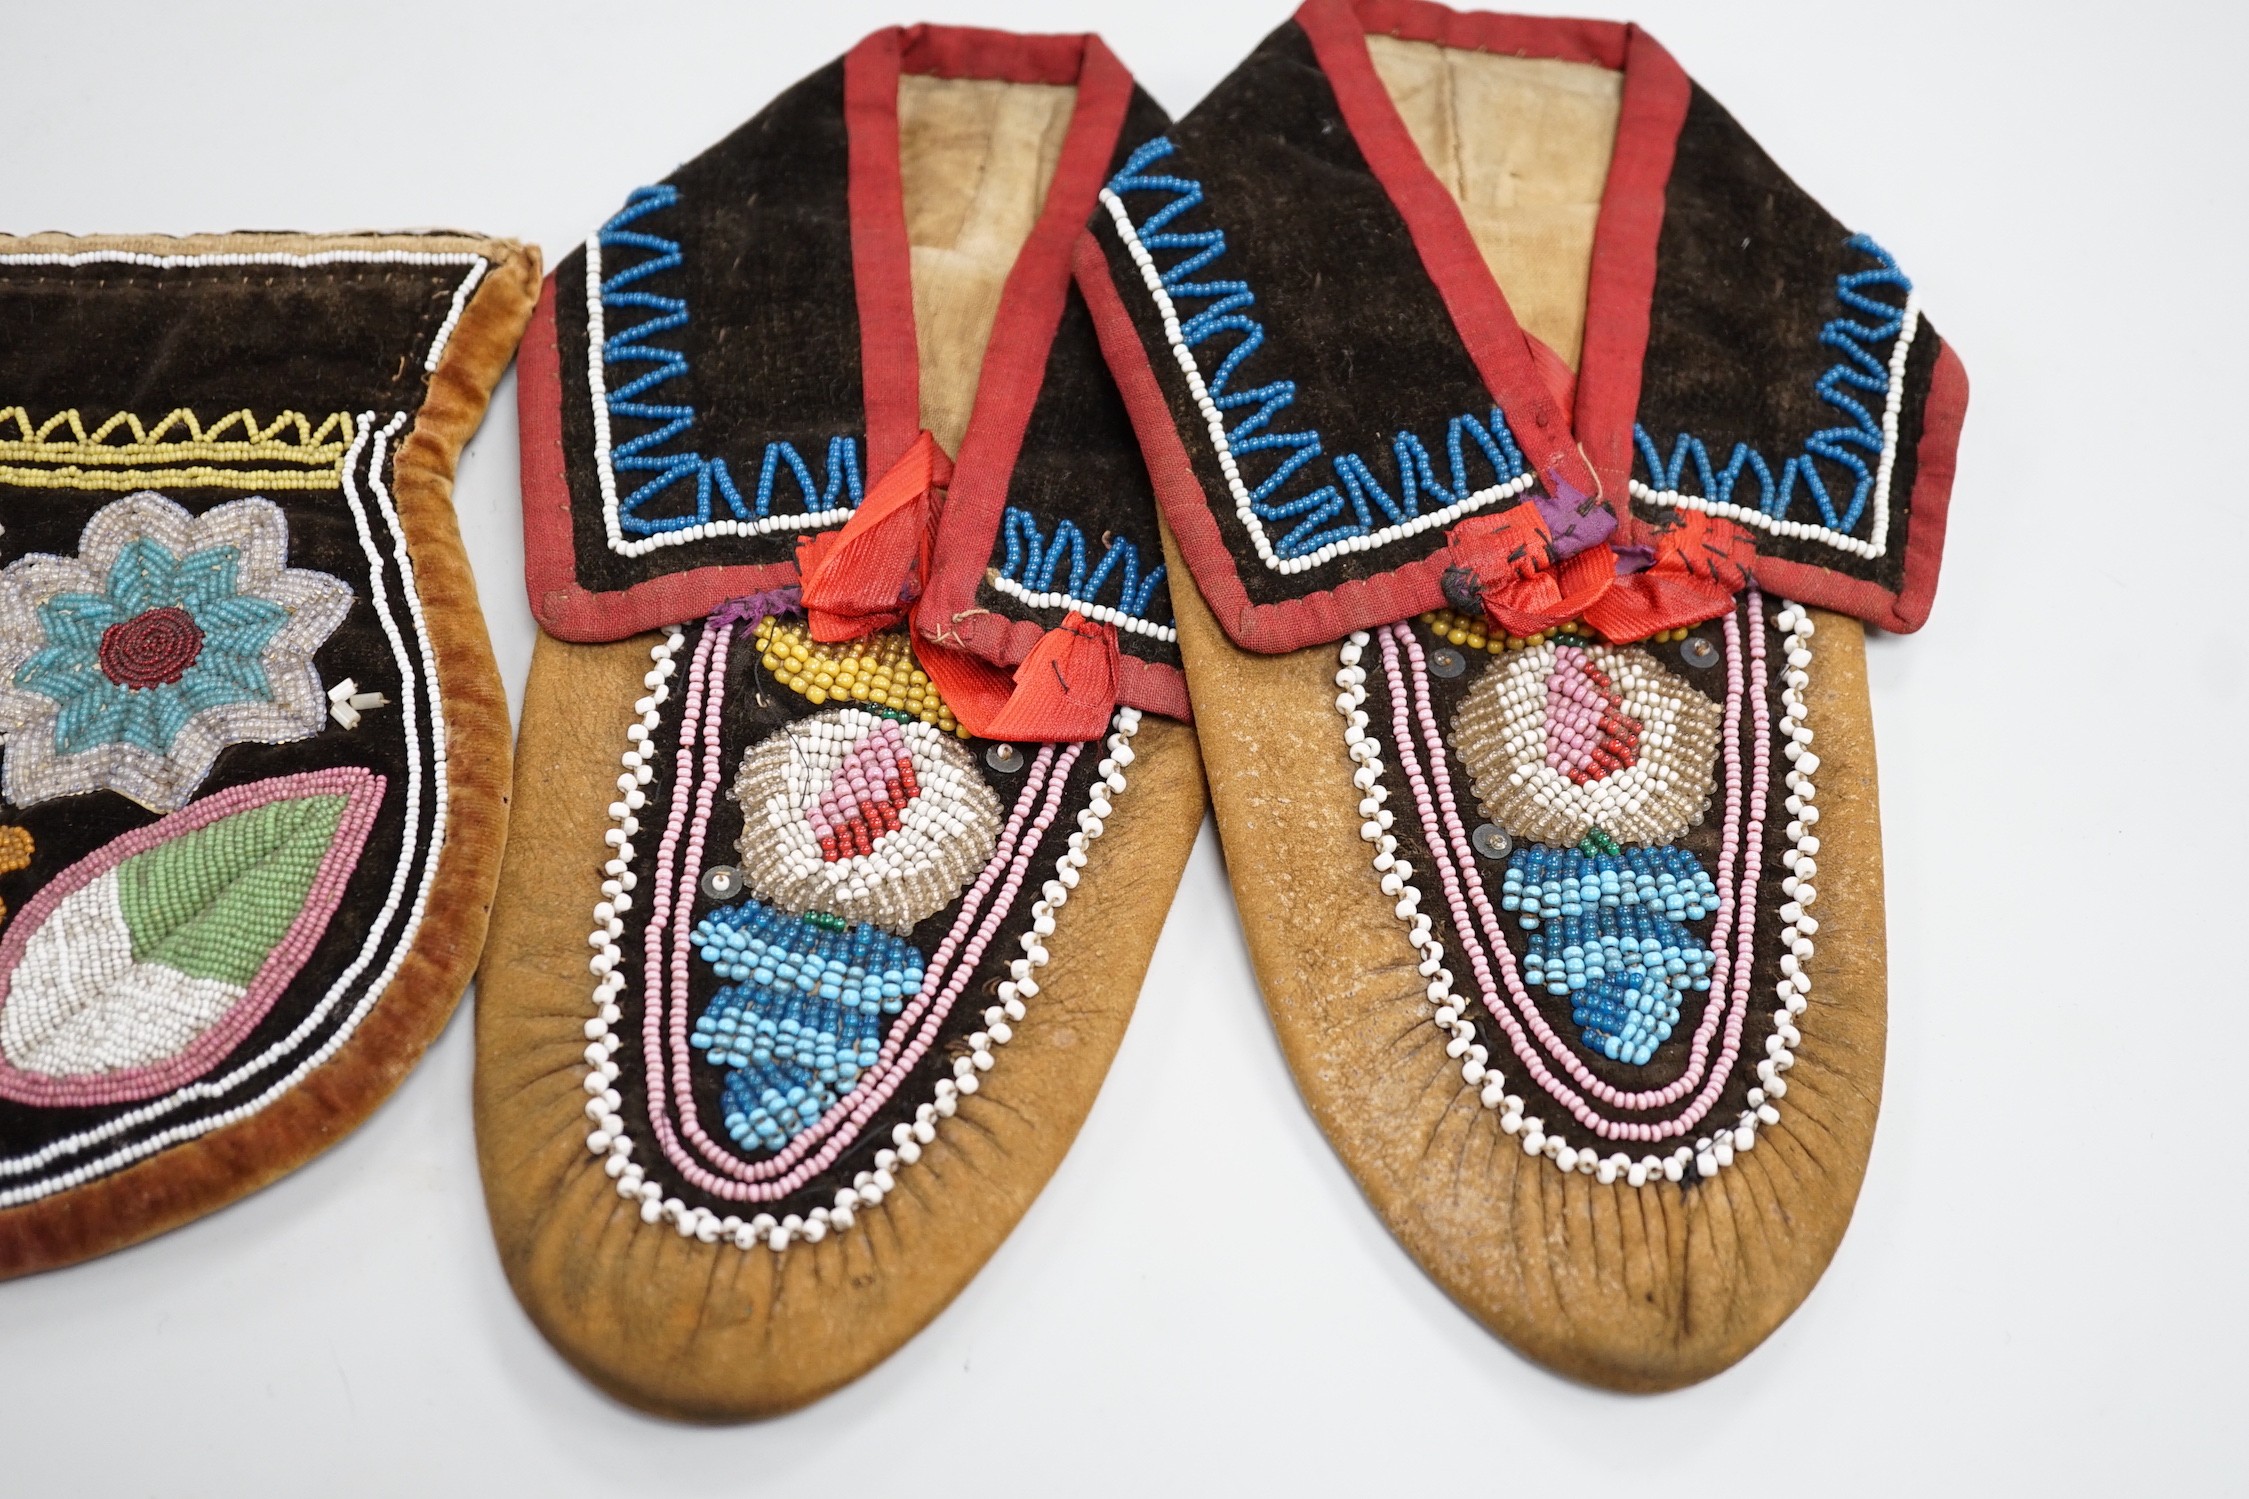 A pair of mid to late 19th century Mikmaq, North American Indian, moccasins, worked in floral beadwork on vamp, with velvet cuffs and red silk ties, together with two Wabanaki floral bead-worked velvet bags